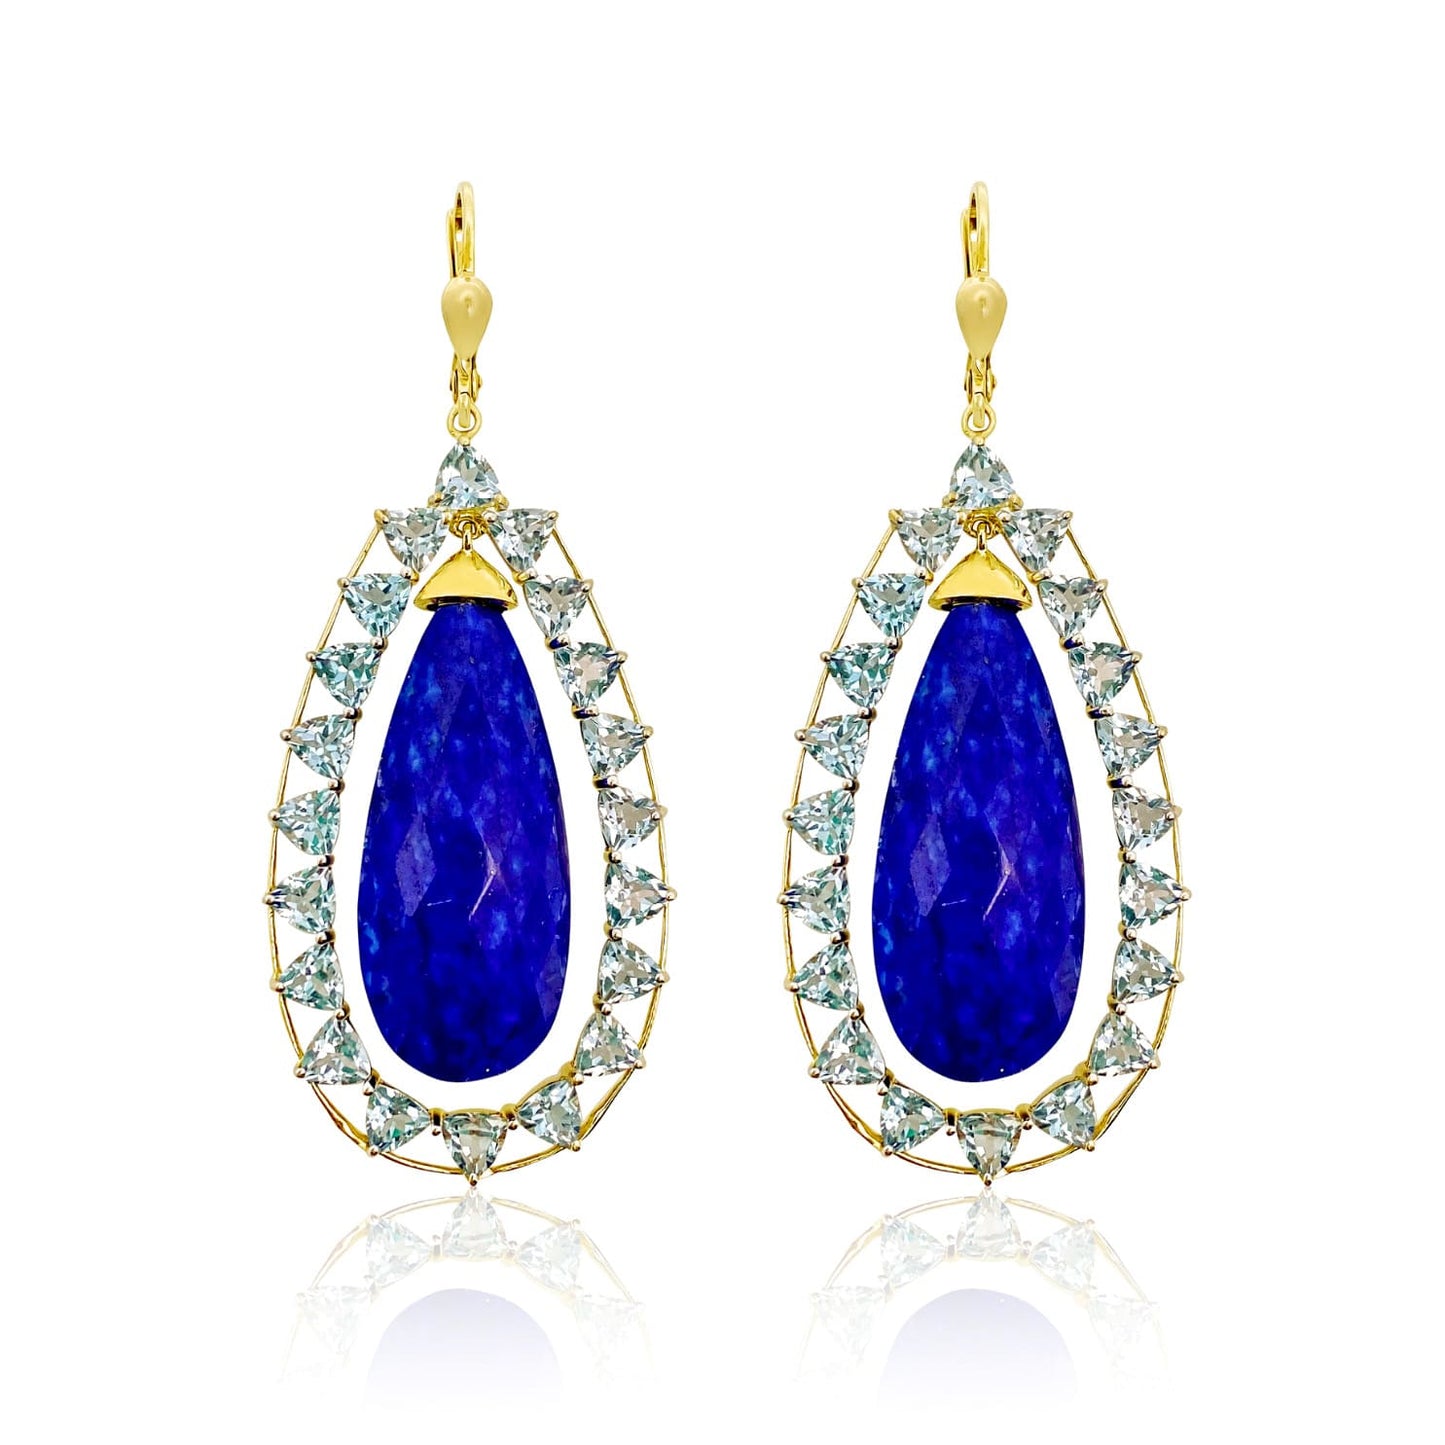 Lapis and Blue Topaz Statement Earrings